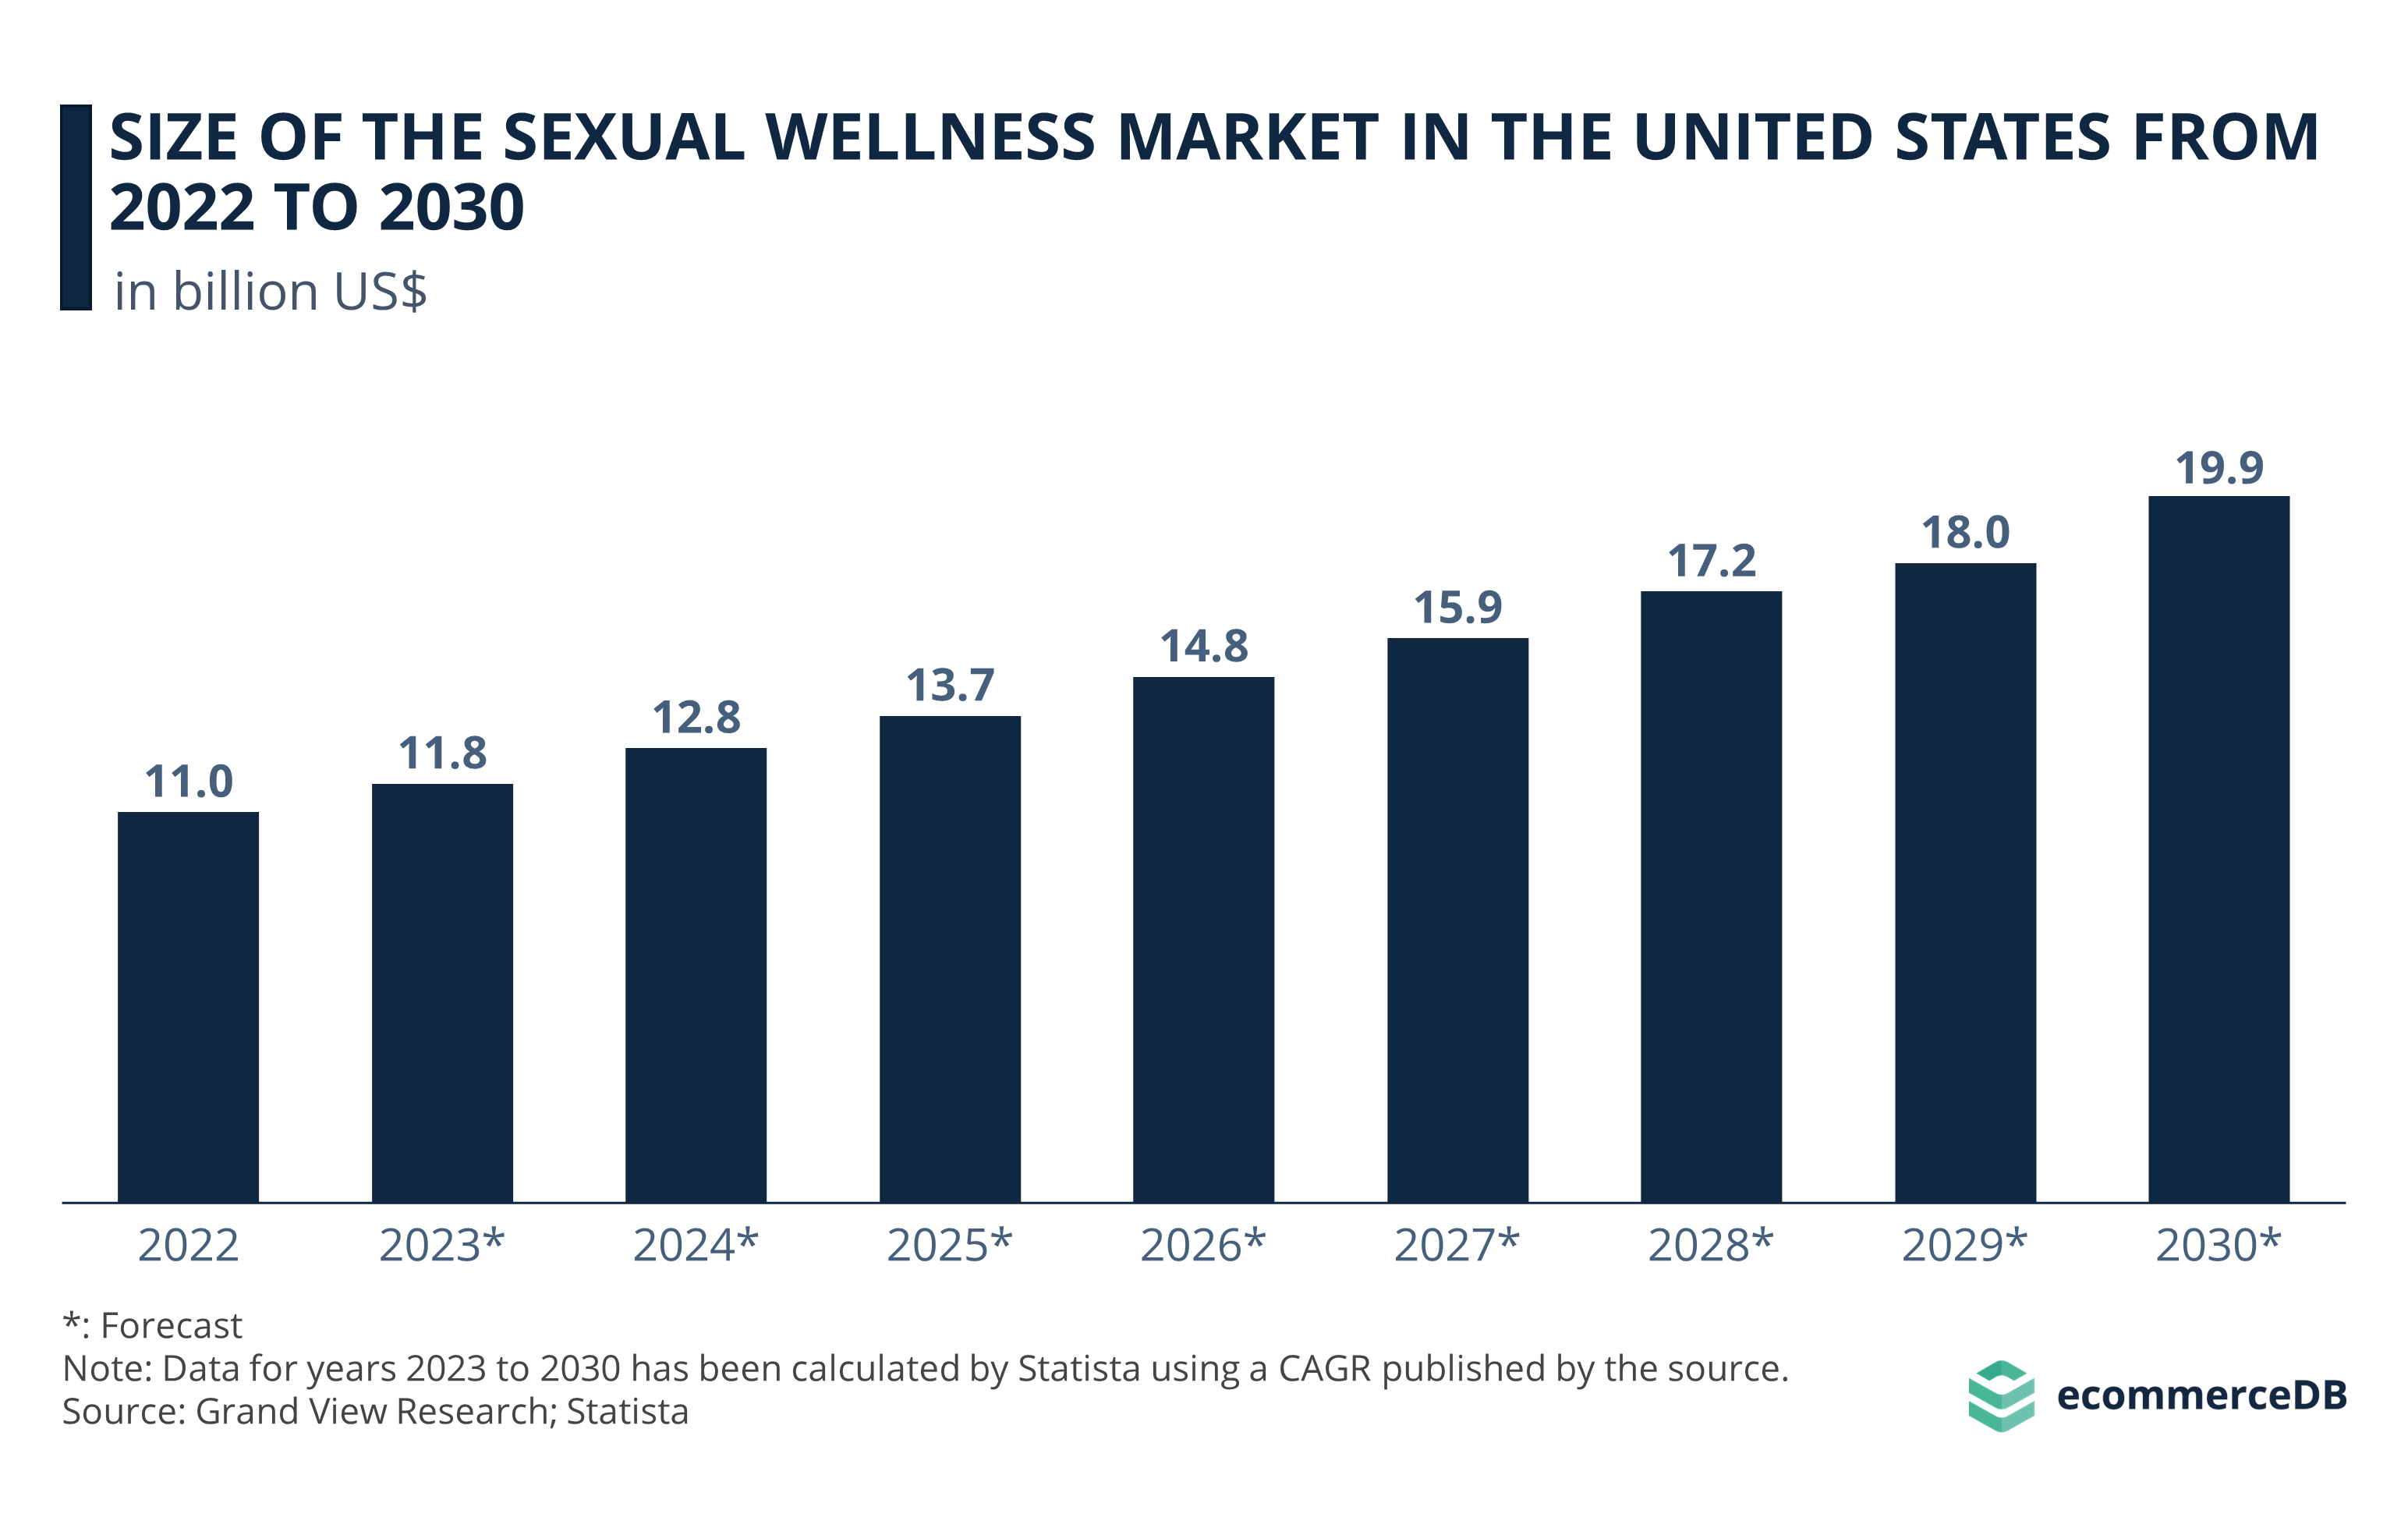 Size of the Sexual Wellness Market in the United States from 2022 to 2030